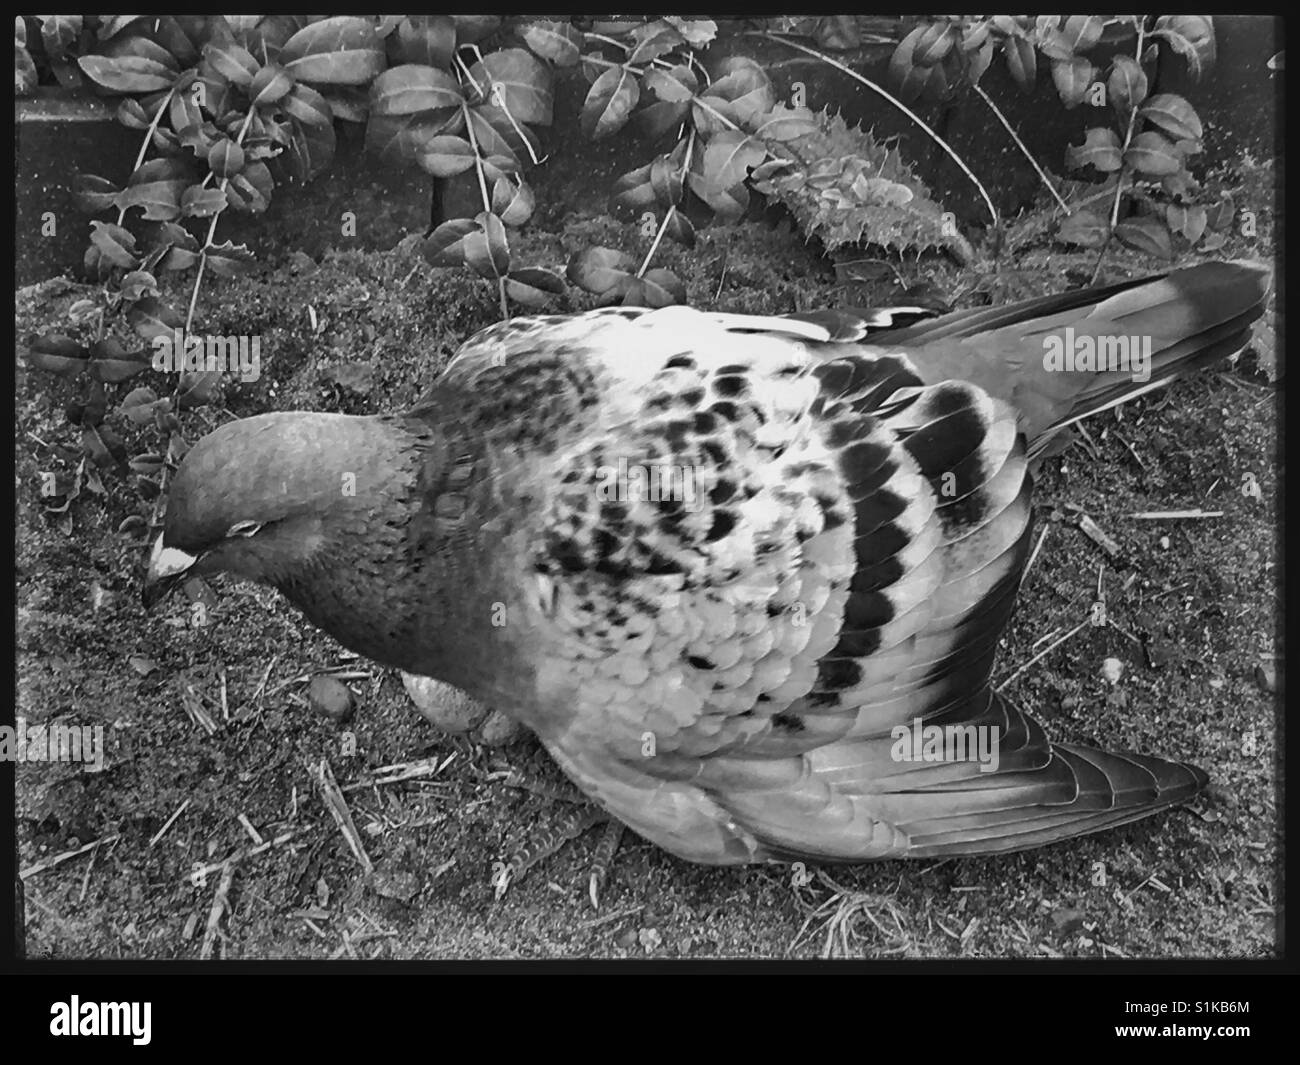 Racing Pigeon with an injured wing. Stock Photo